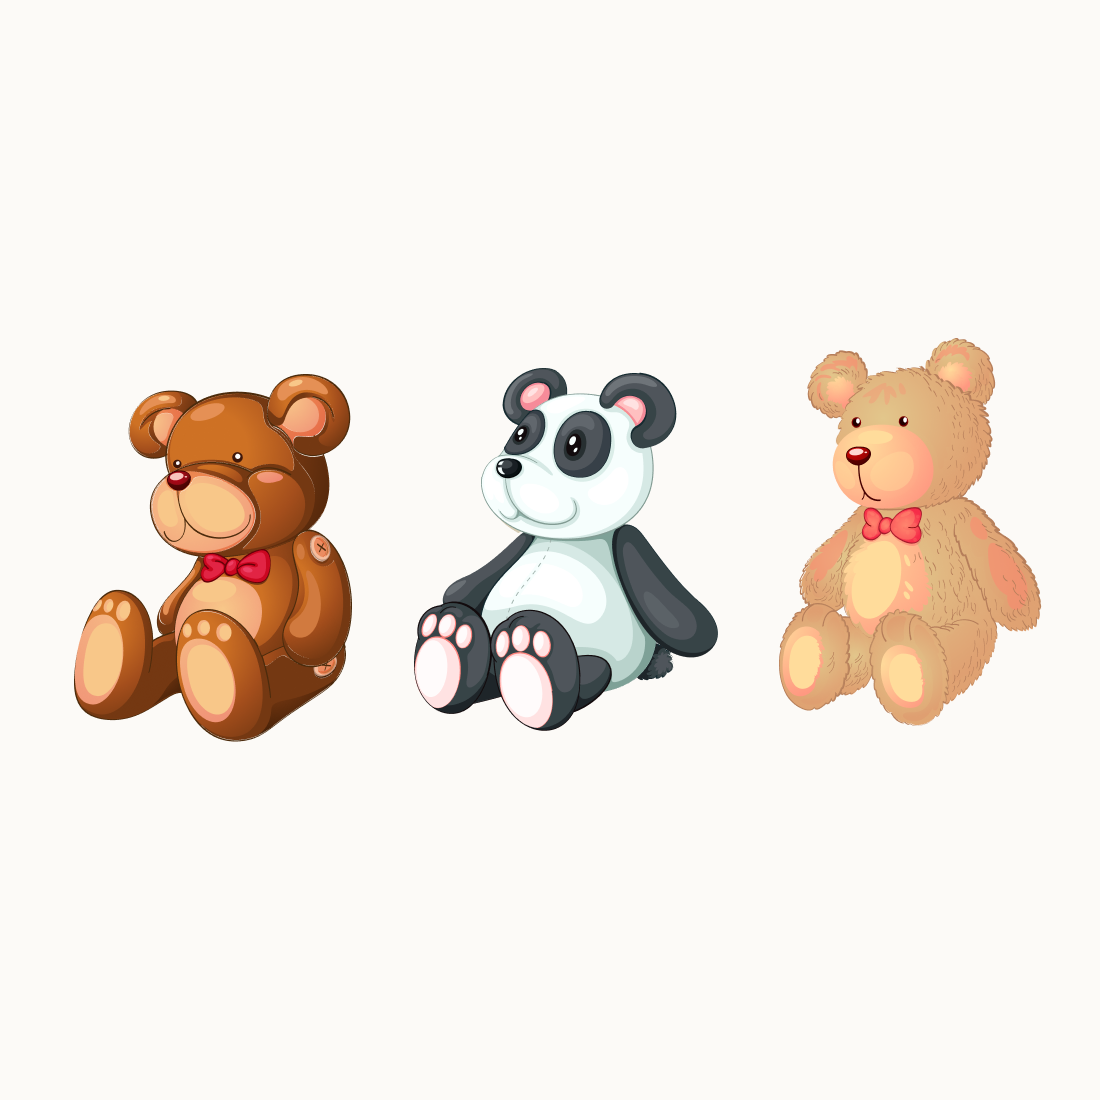 Group of three teddy bears sitting next to each other.